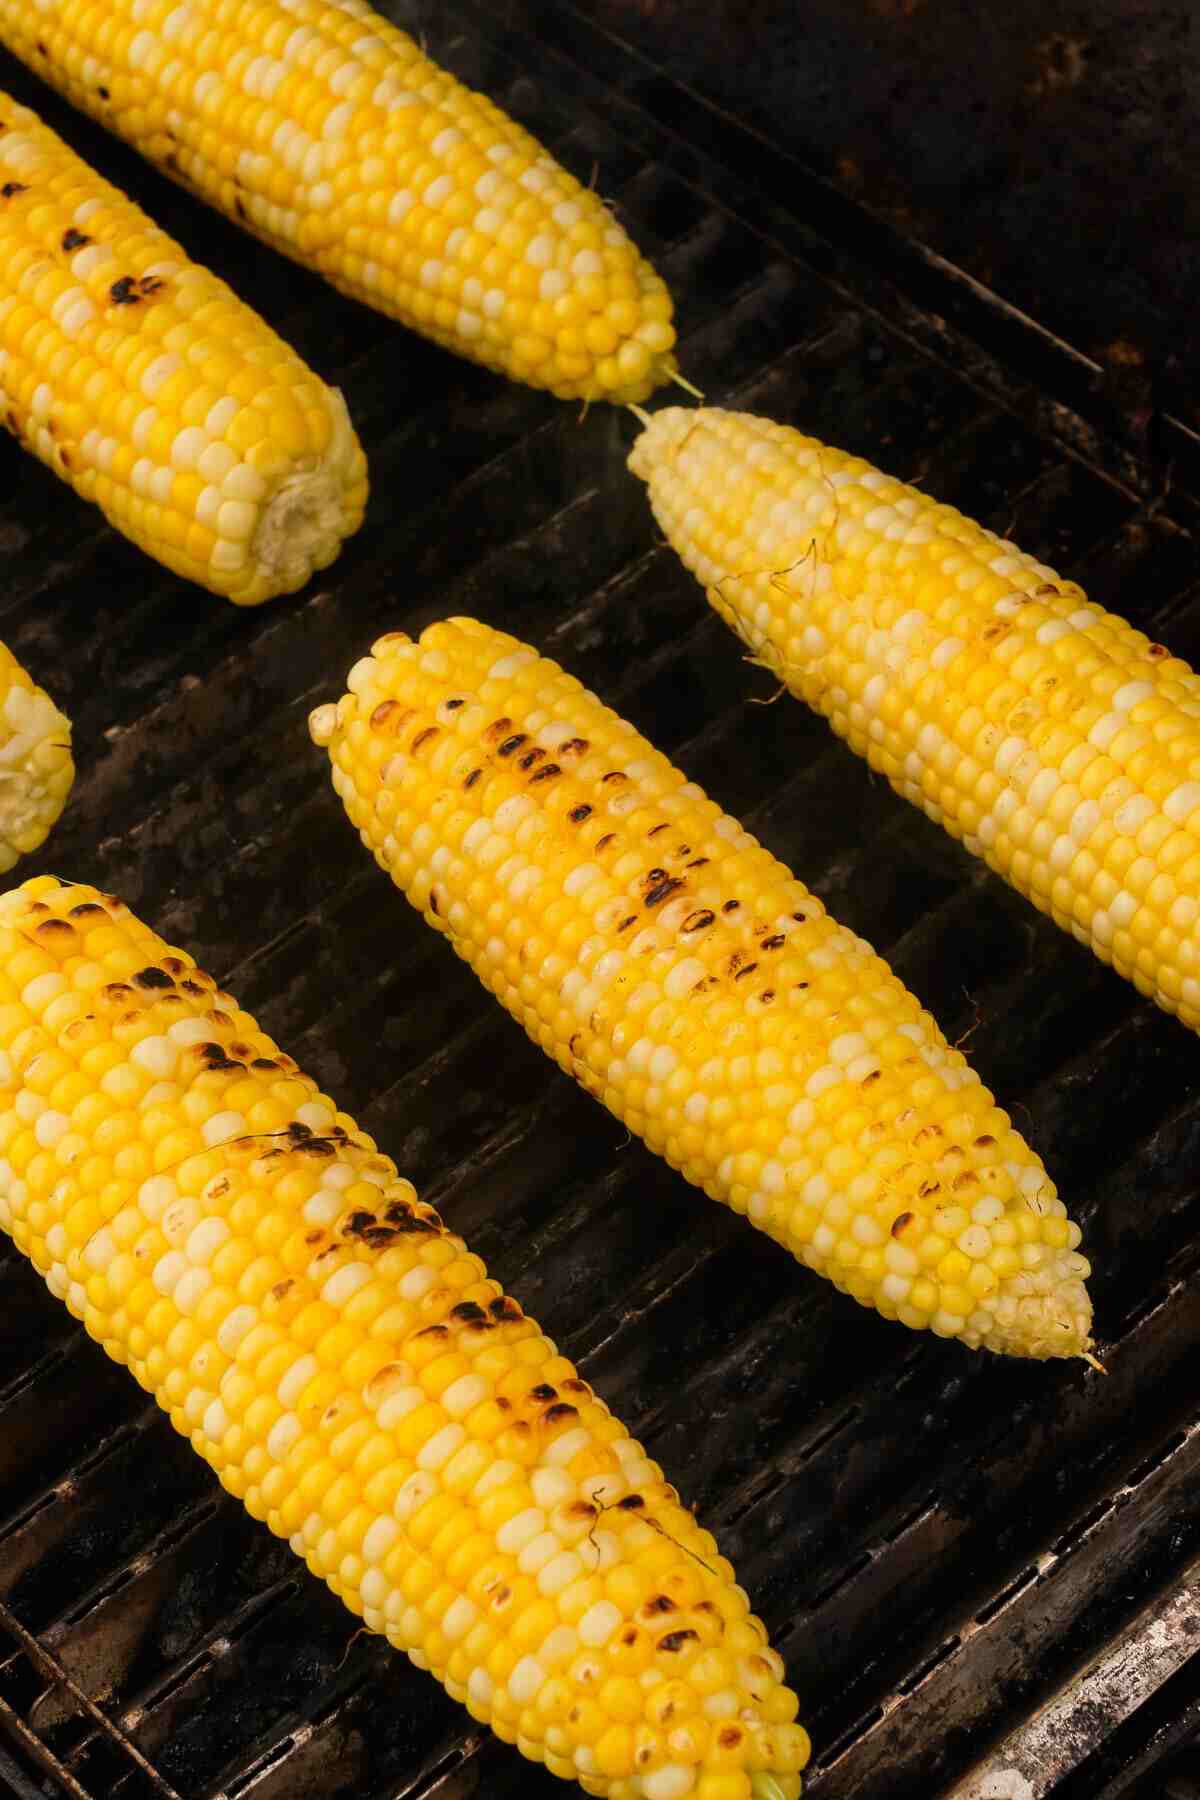 corn on the cob being cooked on a grill.